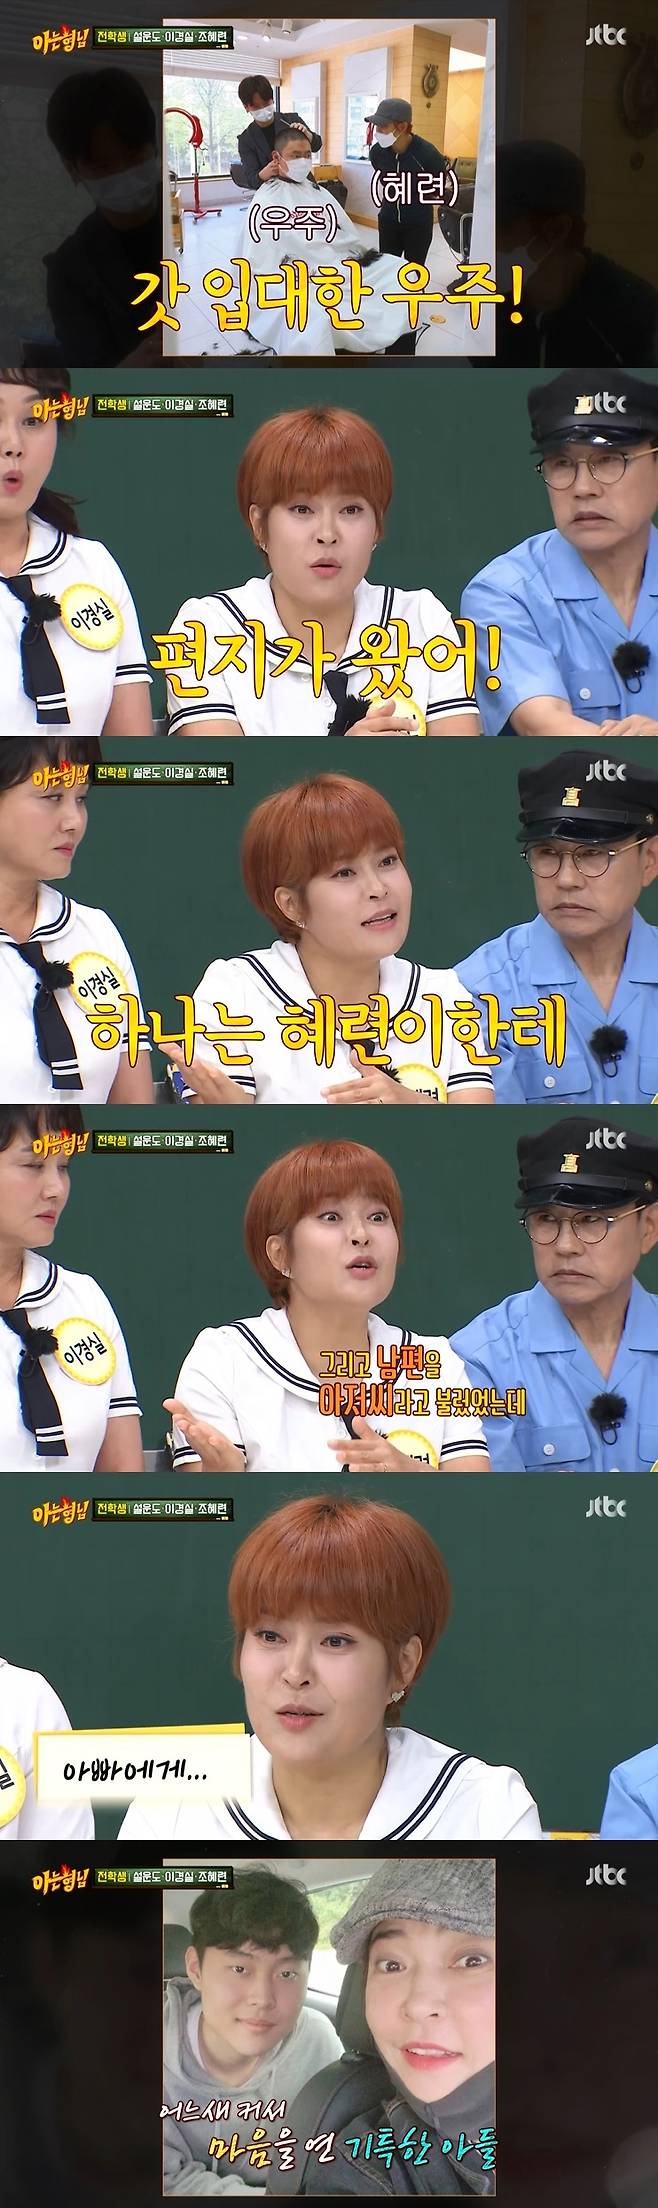 Gagwoman and actor Jo Hye-ryun mentioned Husband remarriedOn July 24, JTBC Knowing Bros, Jo Hye-ryun reported on the recent news of son Space and Husband.Jo Hye-ryun appeared as a Kyeong-shil Lee, Sulundo and a former student; the three greeted members of the Knowing Bros before submitting applications for transfer.Kyeong-shil Lee recalled her past in Kim Soo-hyun writers work Love and Ambition and said: It was so glorious at the moment of our visit.I thought I wanted to do Kim Soo-hyuns work. I practiced acting, and Kim Soo-hyun saw me and said, Its stupid.The actors said it was a great compliment. I still remember that word. Then Kyeong-shil Lee recalled the son Son Bo-seung in Penthouse. Lee Sang-min said, Kyeong-shil Lee son is in Penthouse.I recognized my face. I was acting so well. Kyeong-shil Lee said: Im surprised, too. My daughter plays. But son is better cast. You need fat kids everywhere. You play licorice.One day, on my birthday, I gave her an envelope saying it was a gift from my mother. It was a money envelope.I felt strange, so I had 50 checks of 100,000 won, and I gave 5 million won.Ive collected the payouts Ive had so far. Its a snob. Ive been in bed watching all day.I did not think of anything that I hated and hated. Jo Hye-ryun also reported on his recent son Space: Space went to Army on May 25; now hes in the training camp.I havent been on a recruit leave yet. A letter. Two letters in the envelope. One for Mom, one for Father.Space originally called Husband The Man from Nowhere, which read: To Father. Husband cried so much.I was so happy to see the letter. I think I know the happiness of Kyeong-shil Lee 